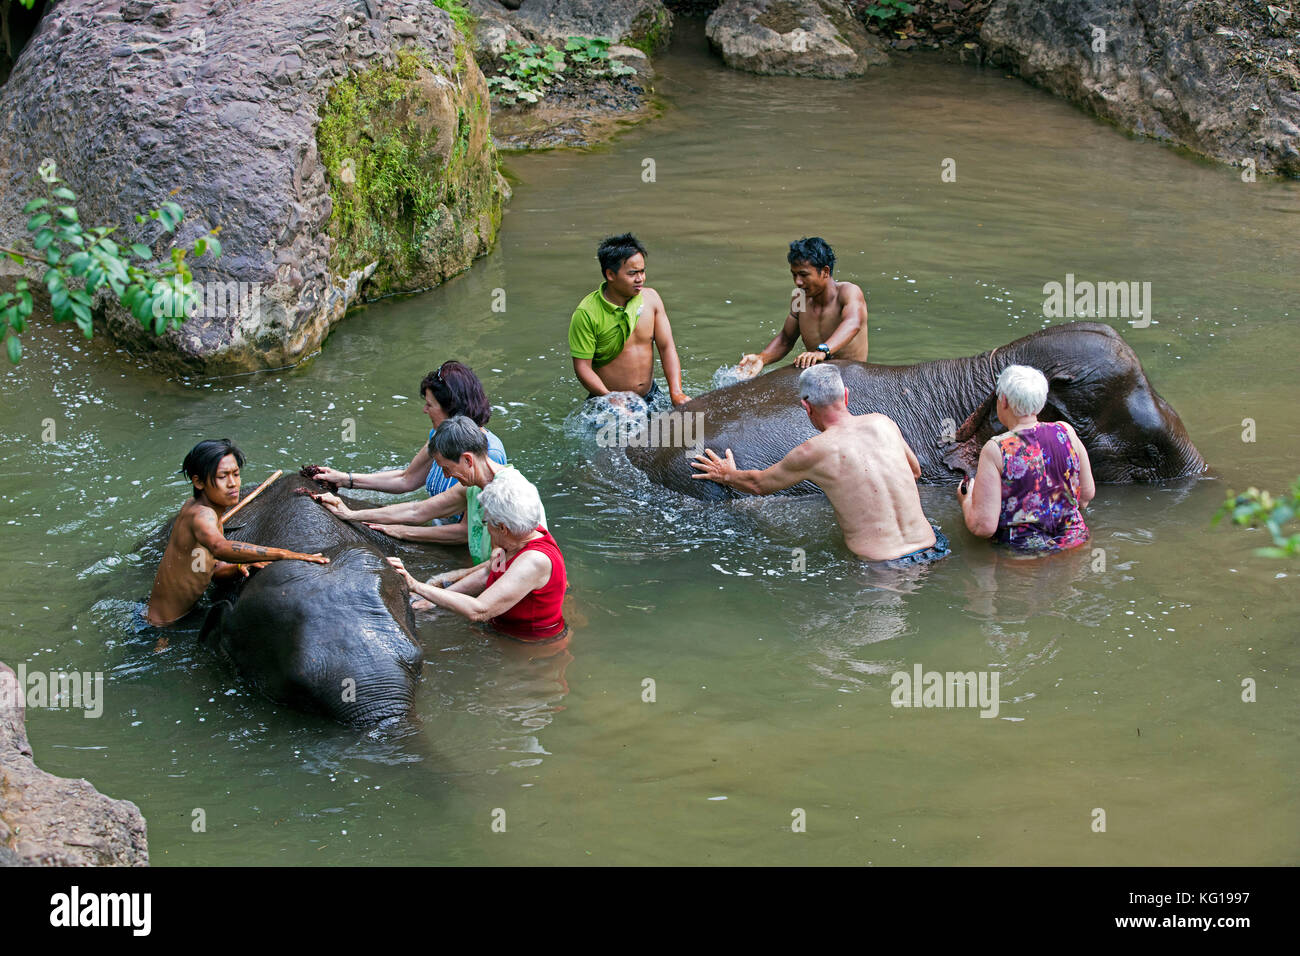 Tourists help washing Asian elephants / Asiatic elephant (Elephas maximus) in river at elephant camp in Myanmar / Burma Stock Photo